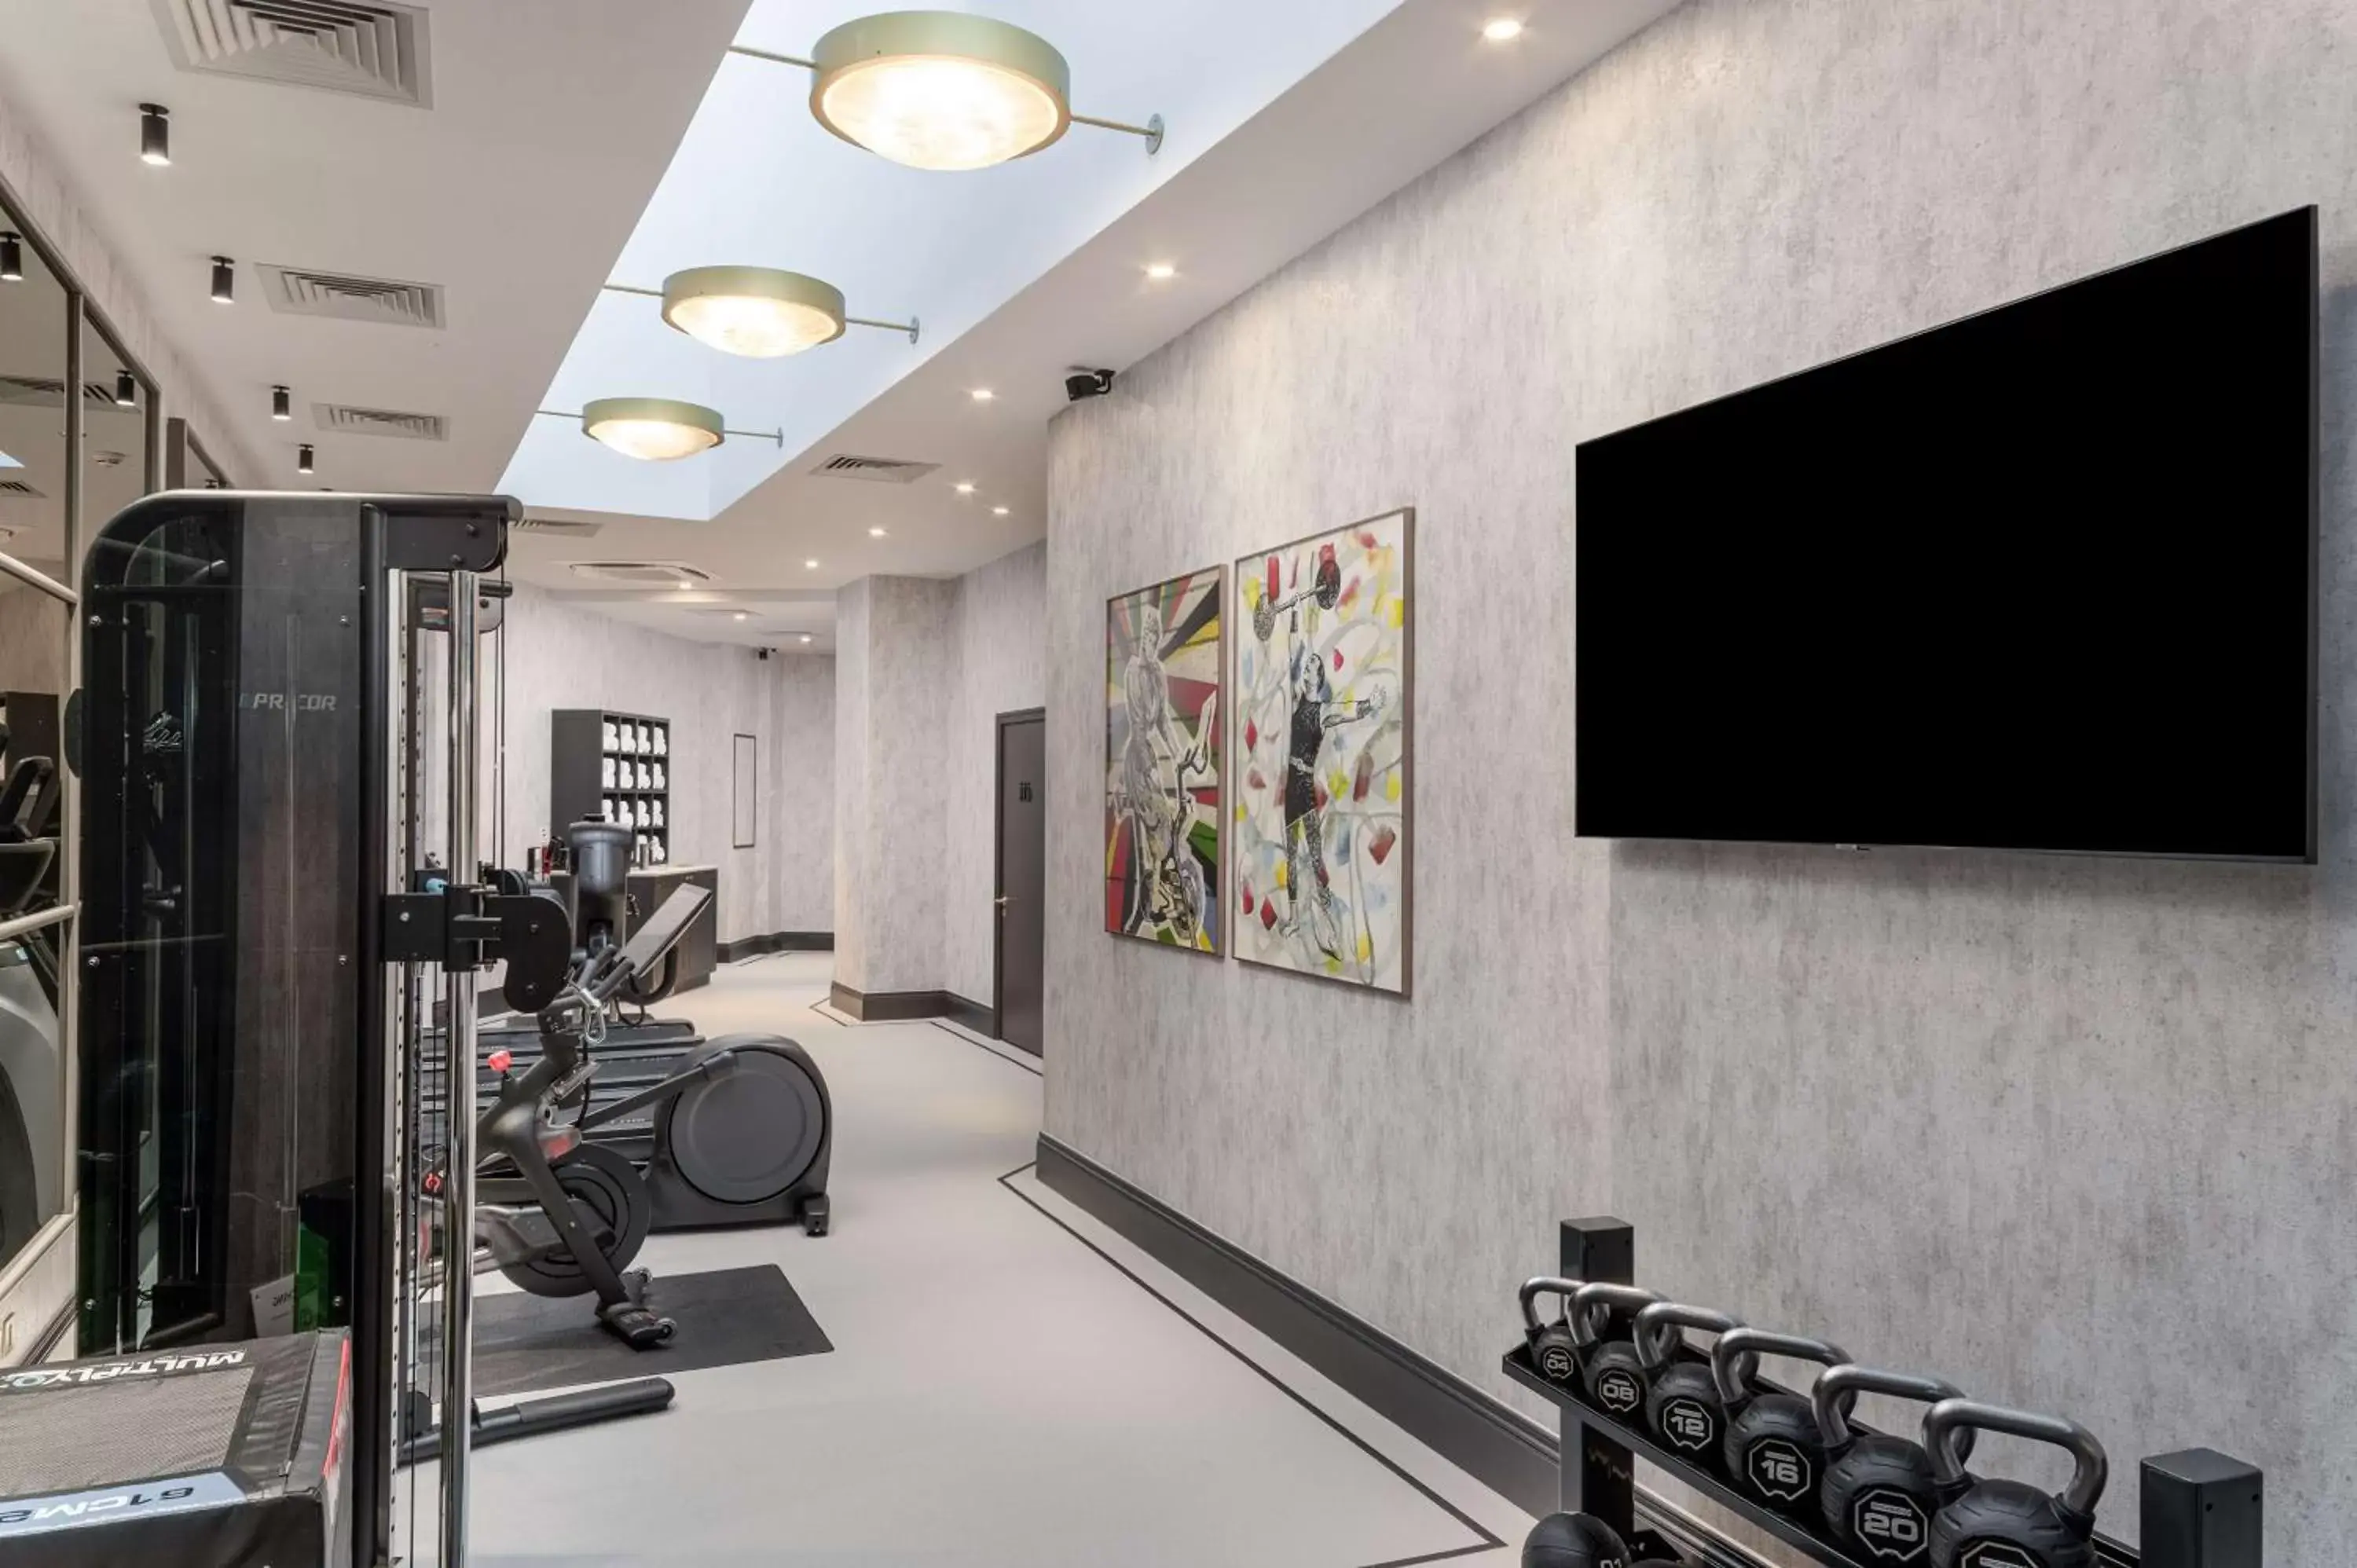 Fitness centre/facilities, Fitness Center/Facilities in Lost Property St Pauls London, Curio Collection By Hilton